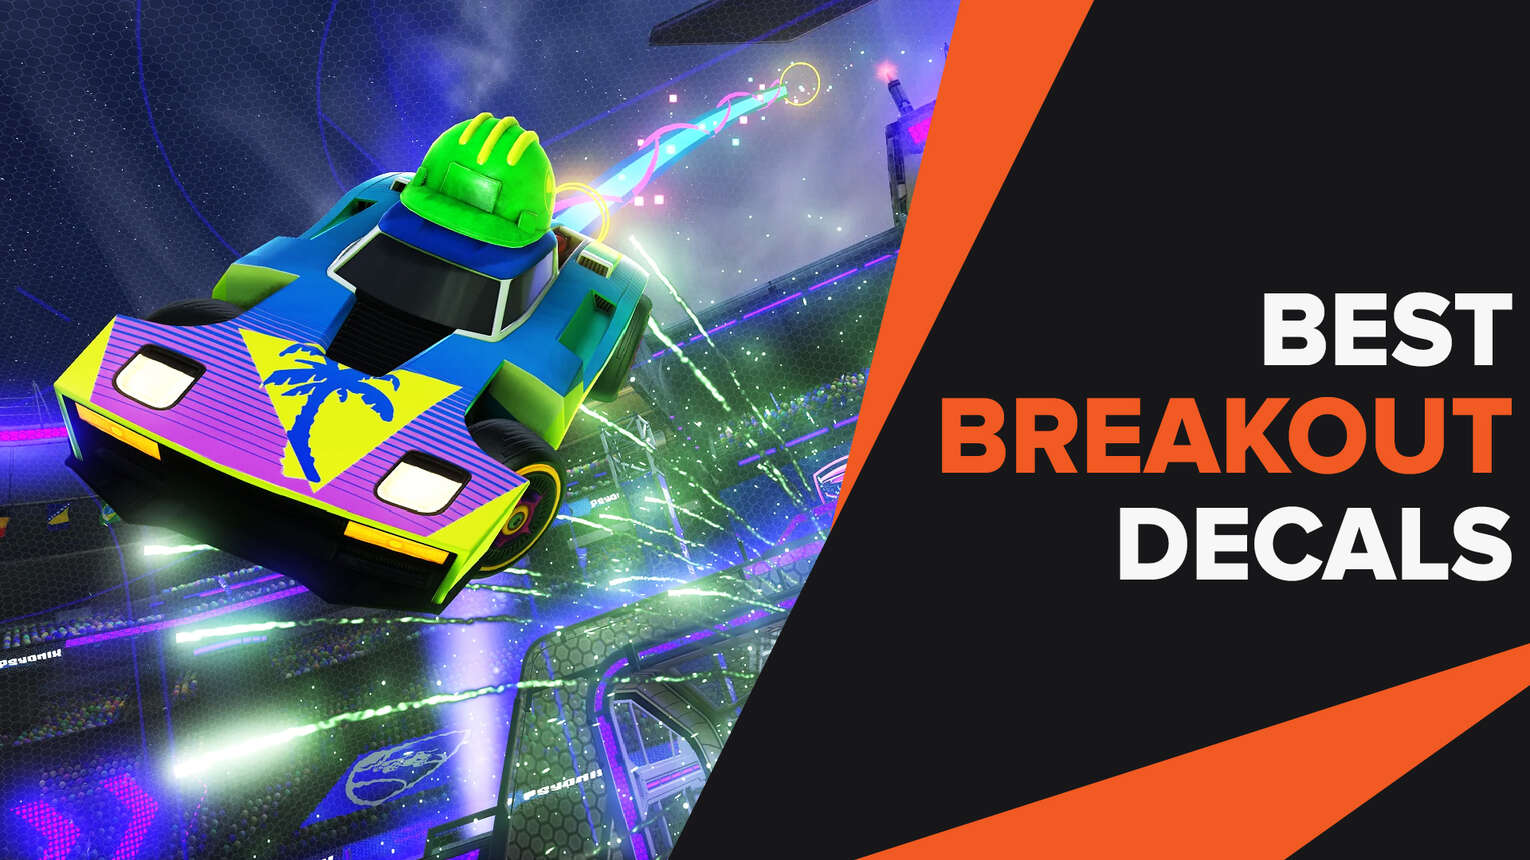 Best Breakout Decals that will make you outshine your competition!